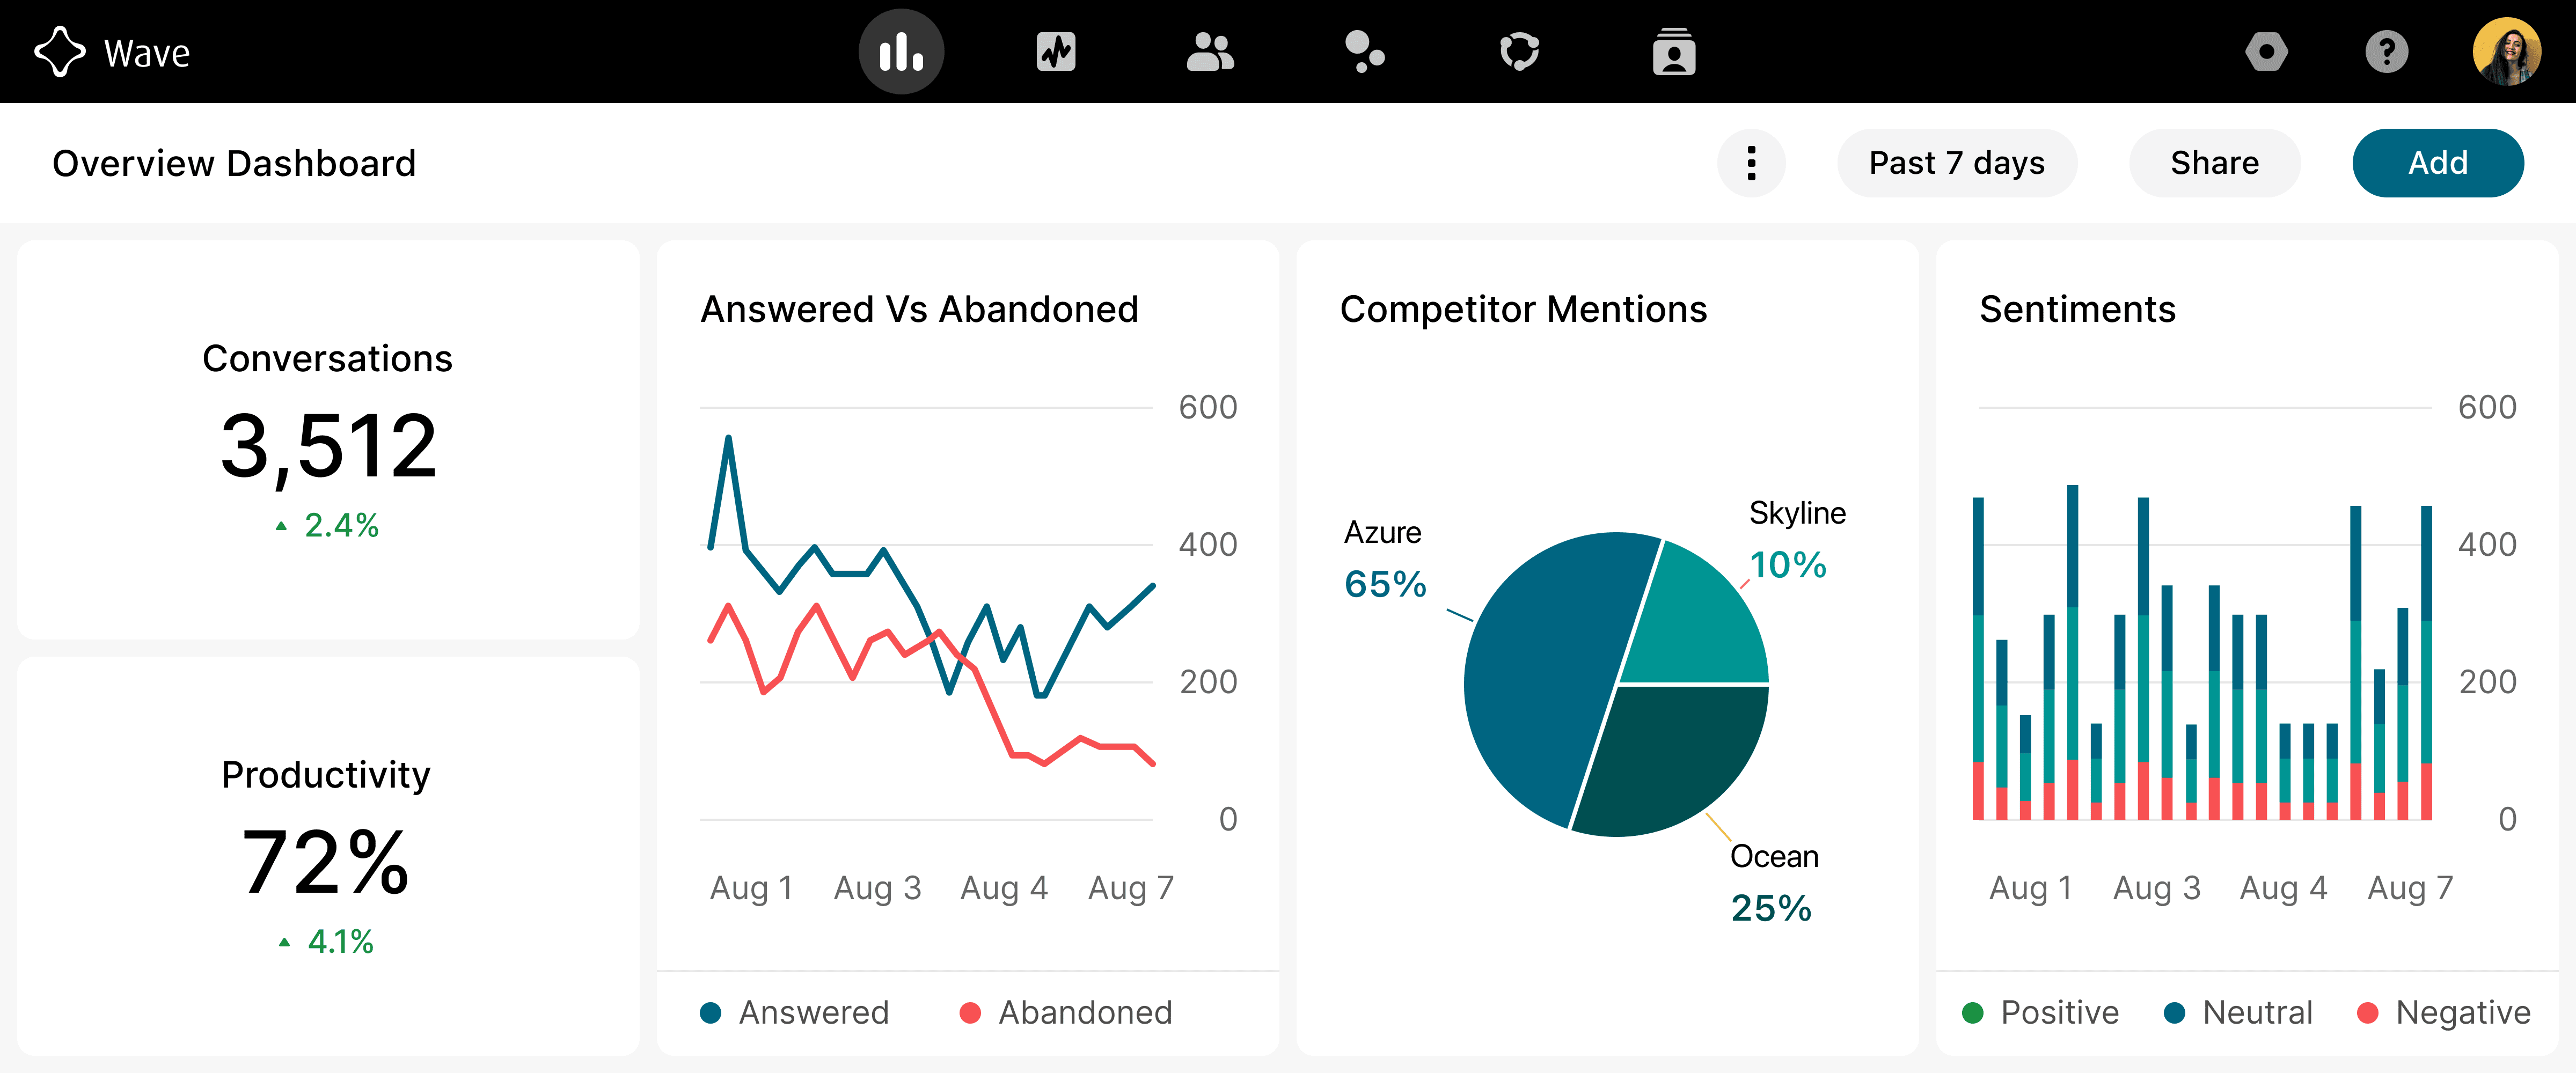 Interactive insights dashboard featuring a summary of total conversations, a line graph contrasting answered versus abandoned calls, a pie chart showing competitor mentions percentages, and a sentiment analysis bar chart with positive, neutral, and negative feedback.